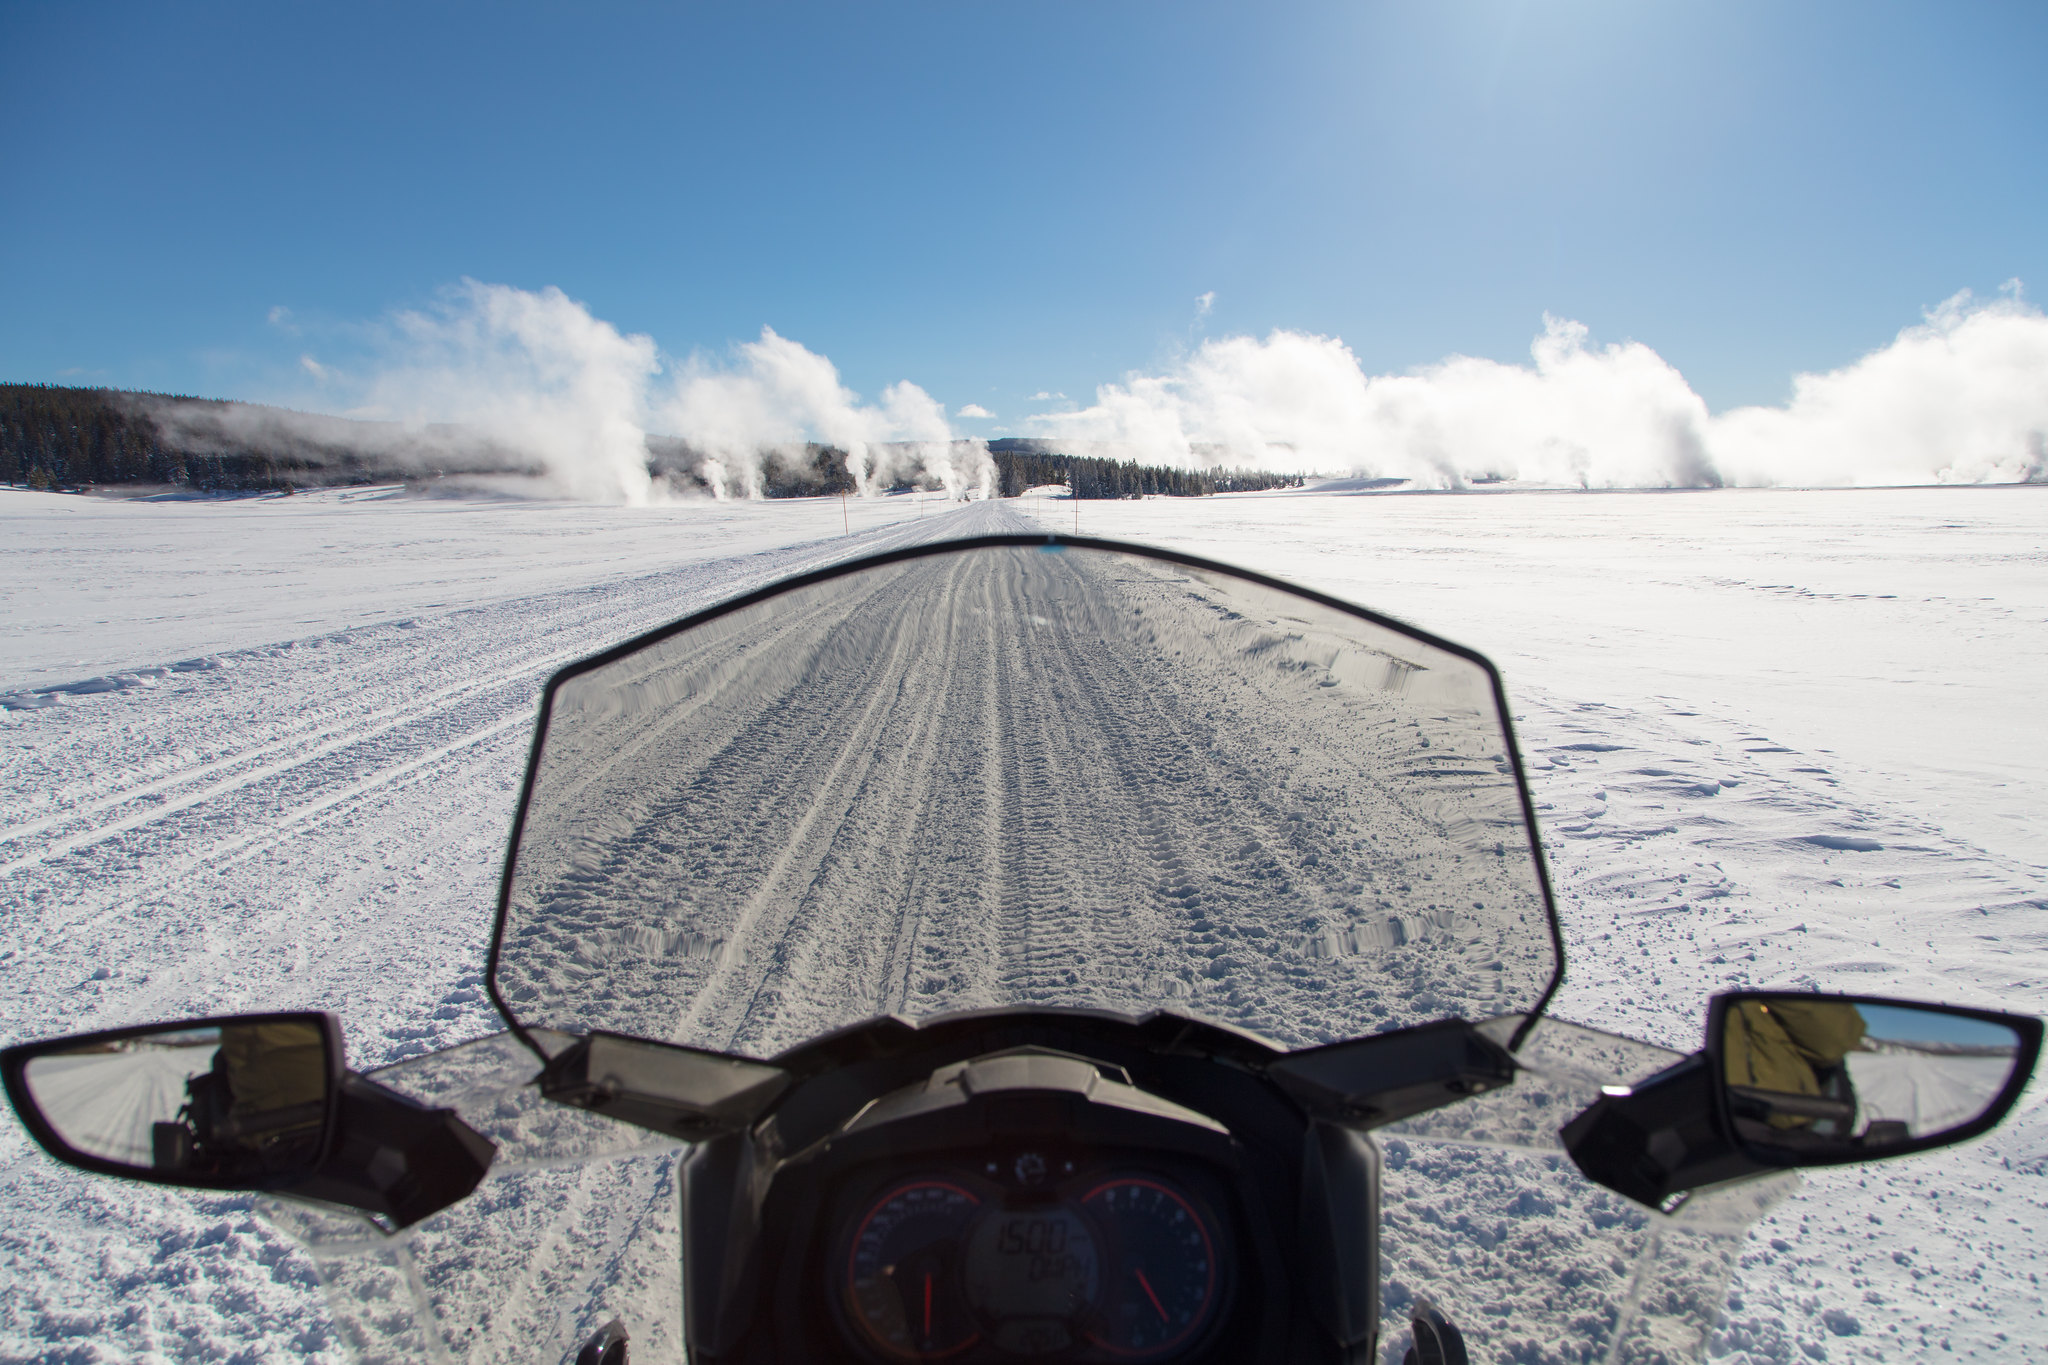 view from a snowmobile on a winter road